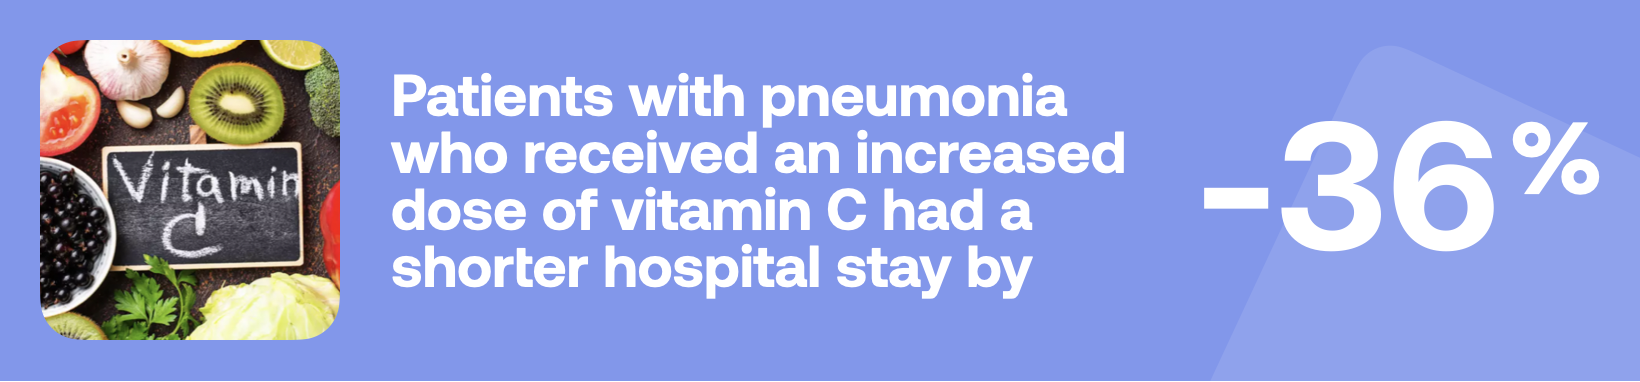 Patients with pneumonia who received an increased dose of vitamin C had a shorter hospital stay by -36%